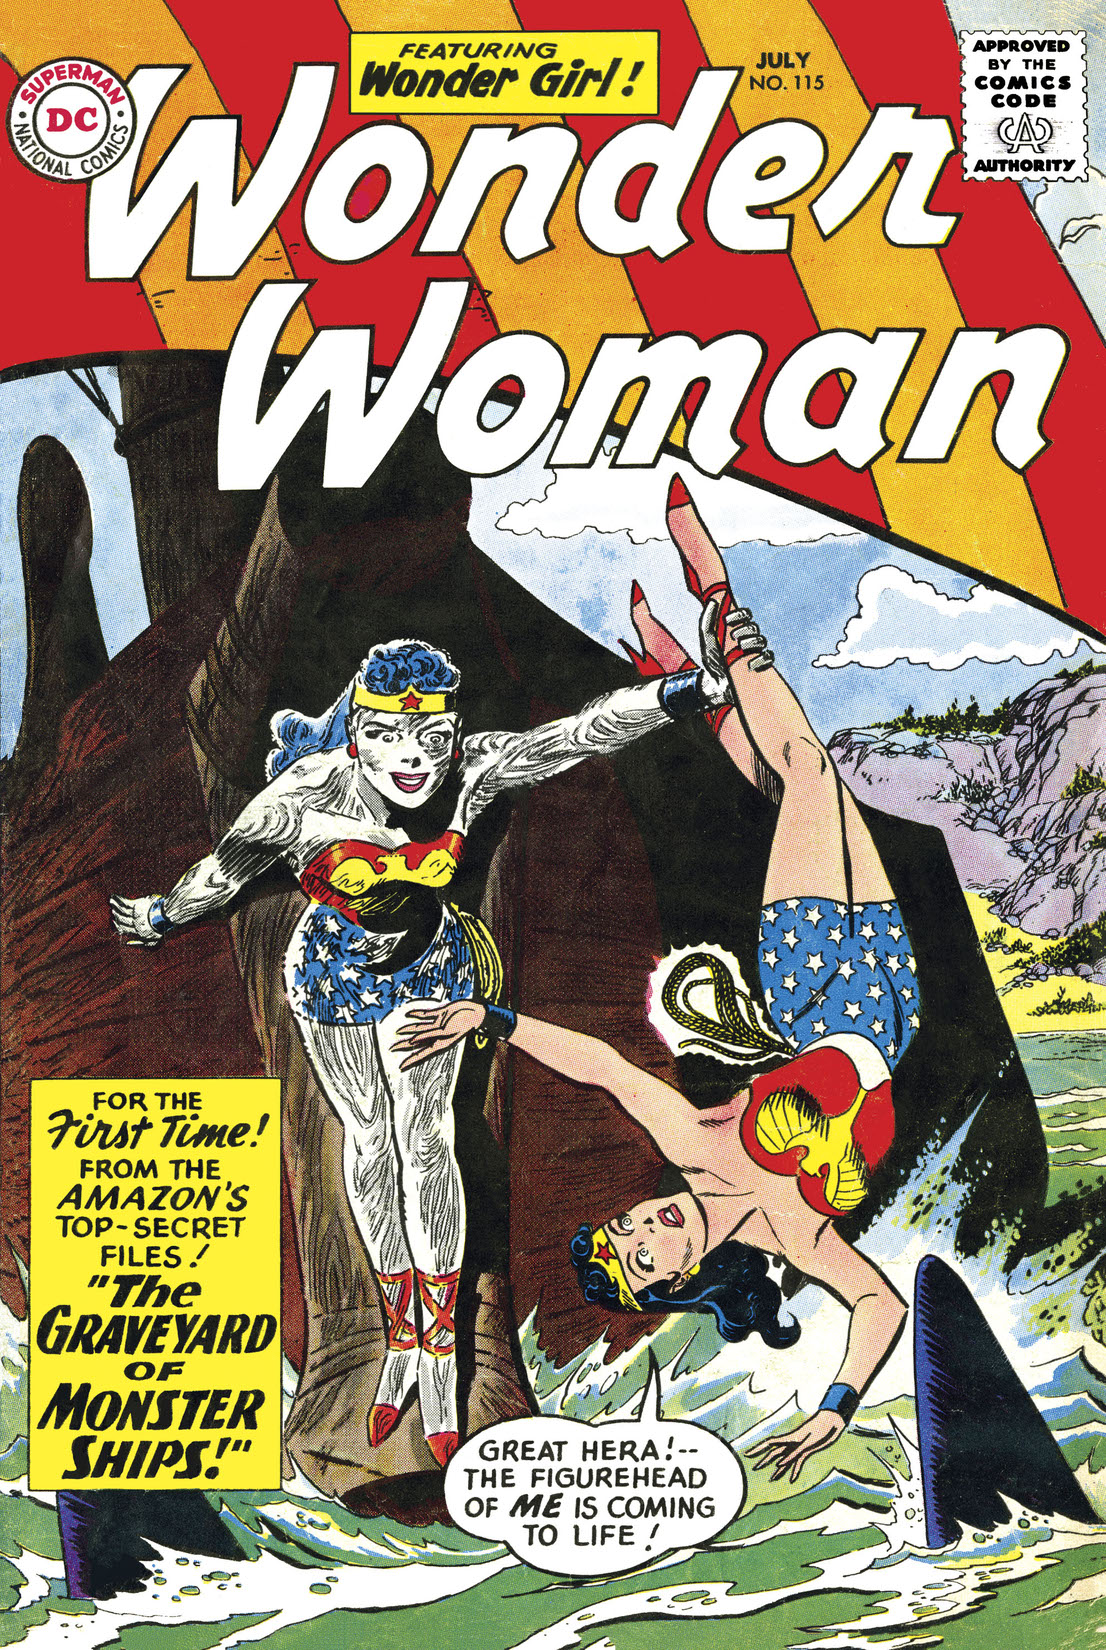 Wonder Woman (1942-) #115 preview images